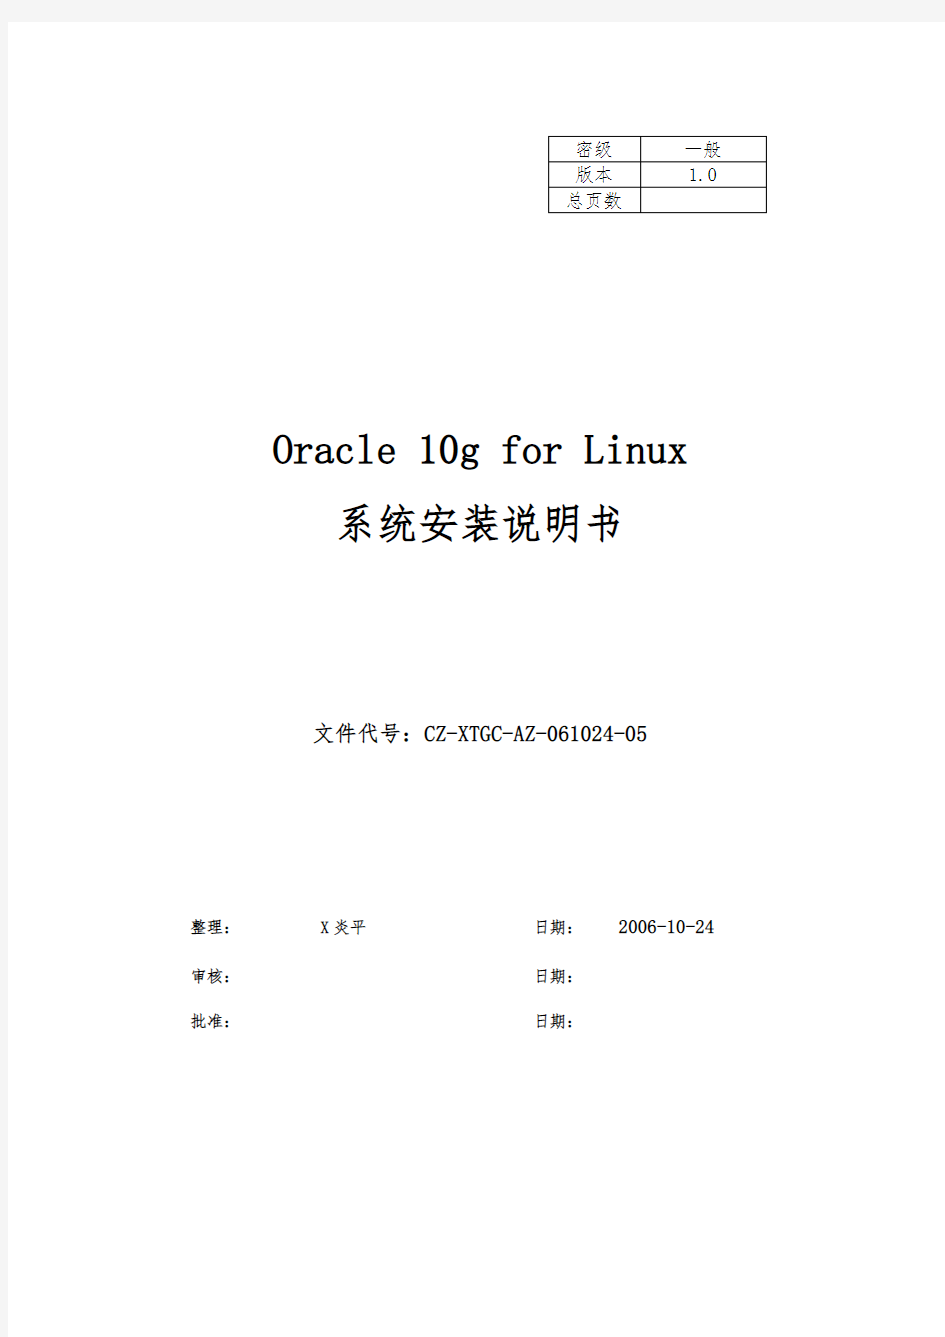 Oracle10g安装说明书(Linux)